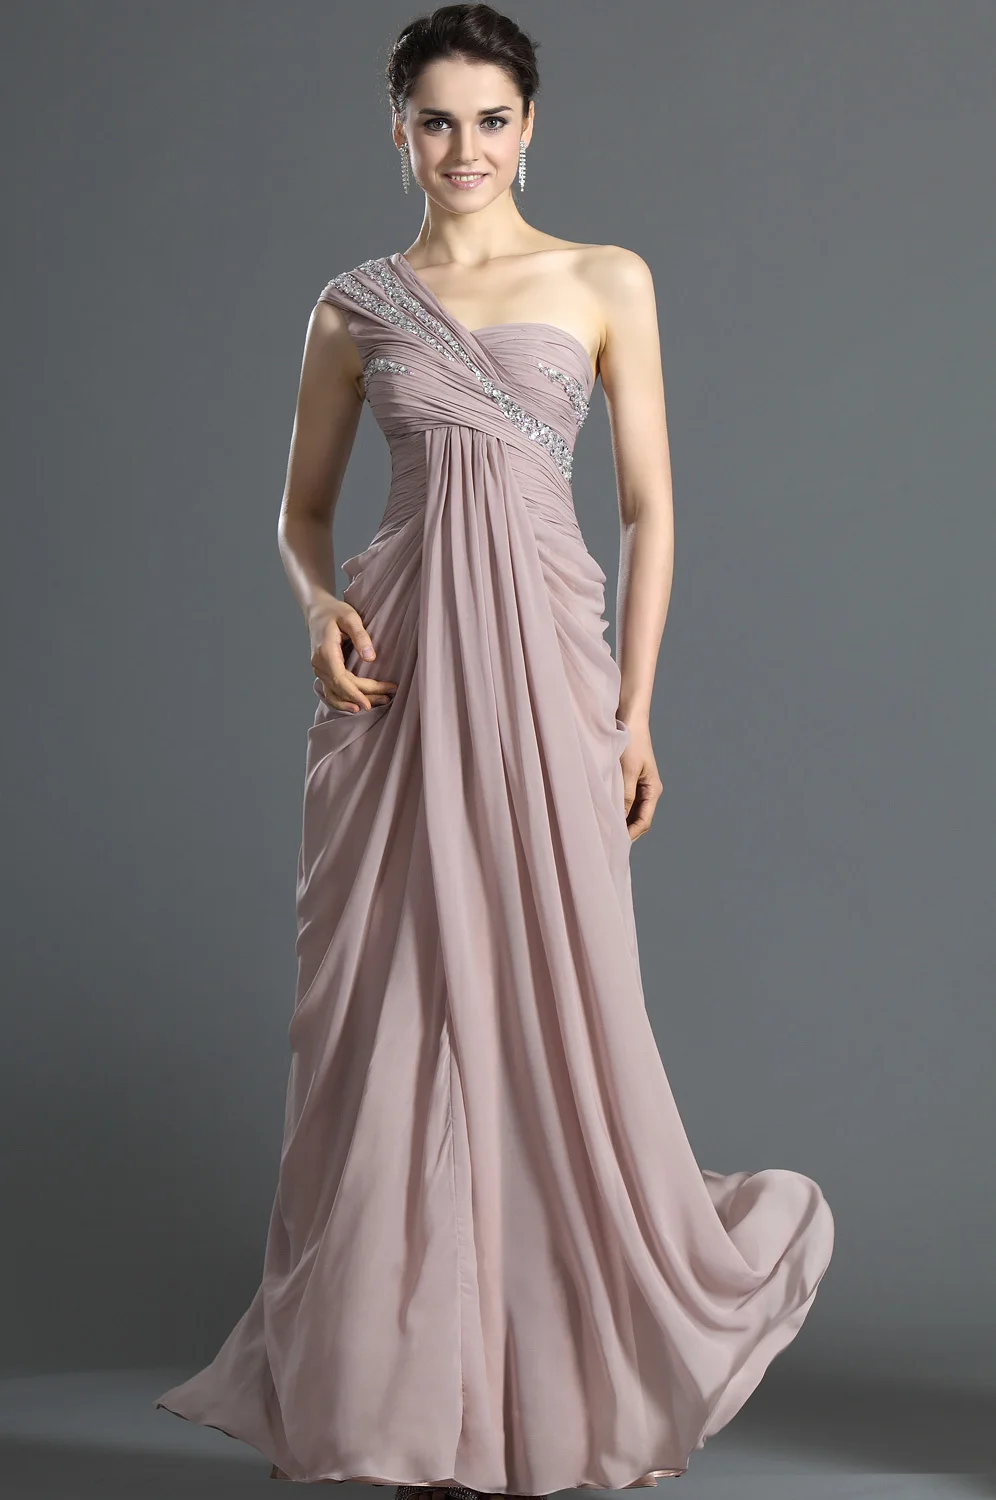 Compare Prices on Affordable Evening Gowns- Online Shopping/Buy ...